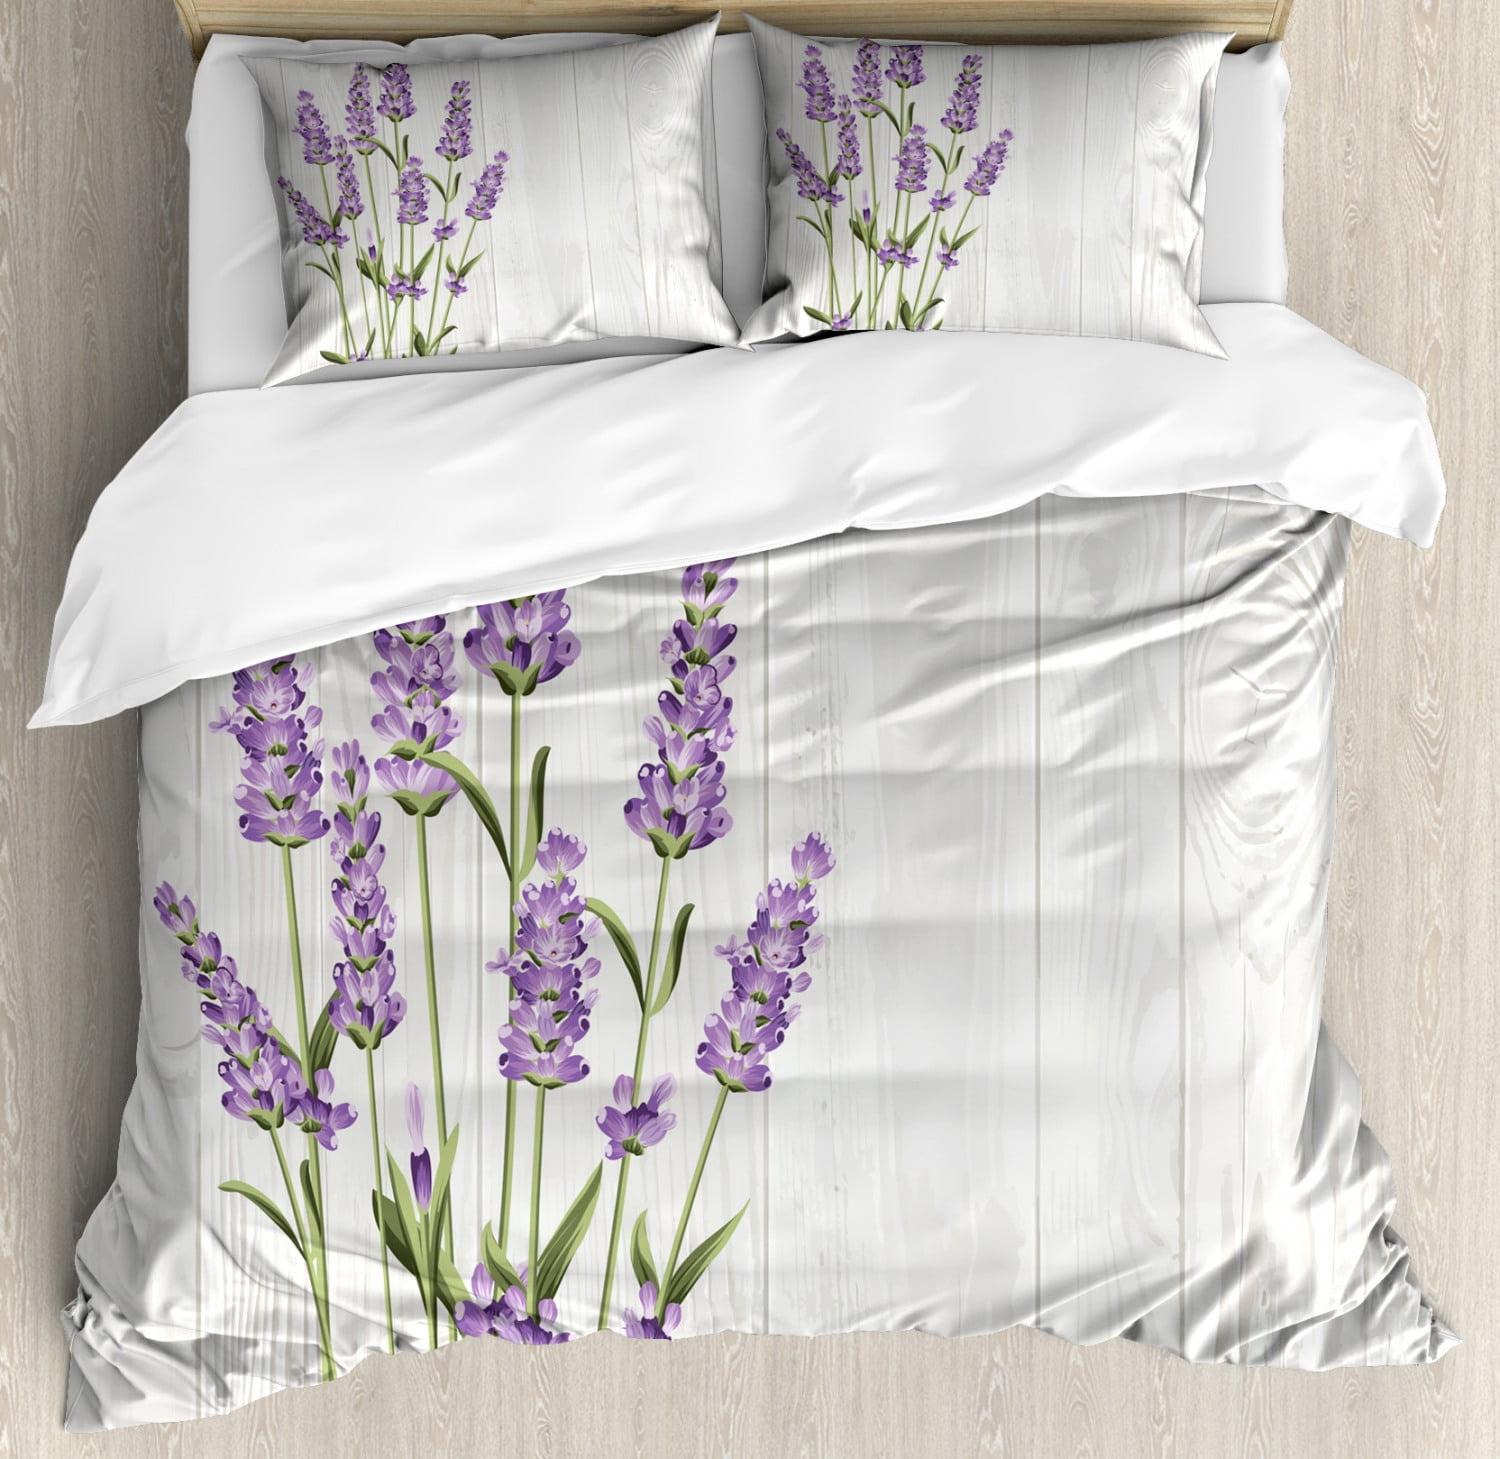 Lavender Queen Size Duvet Cover Set Aromatic Herbs Bouquet On